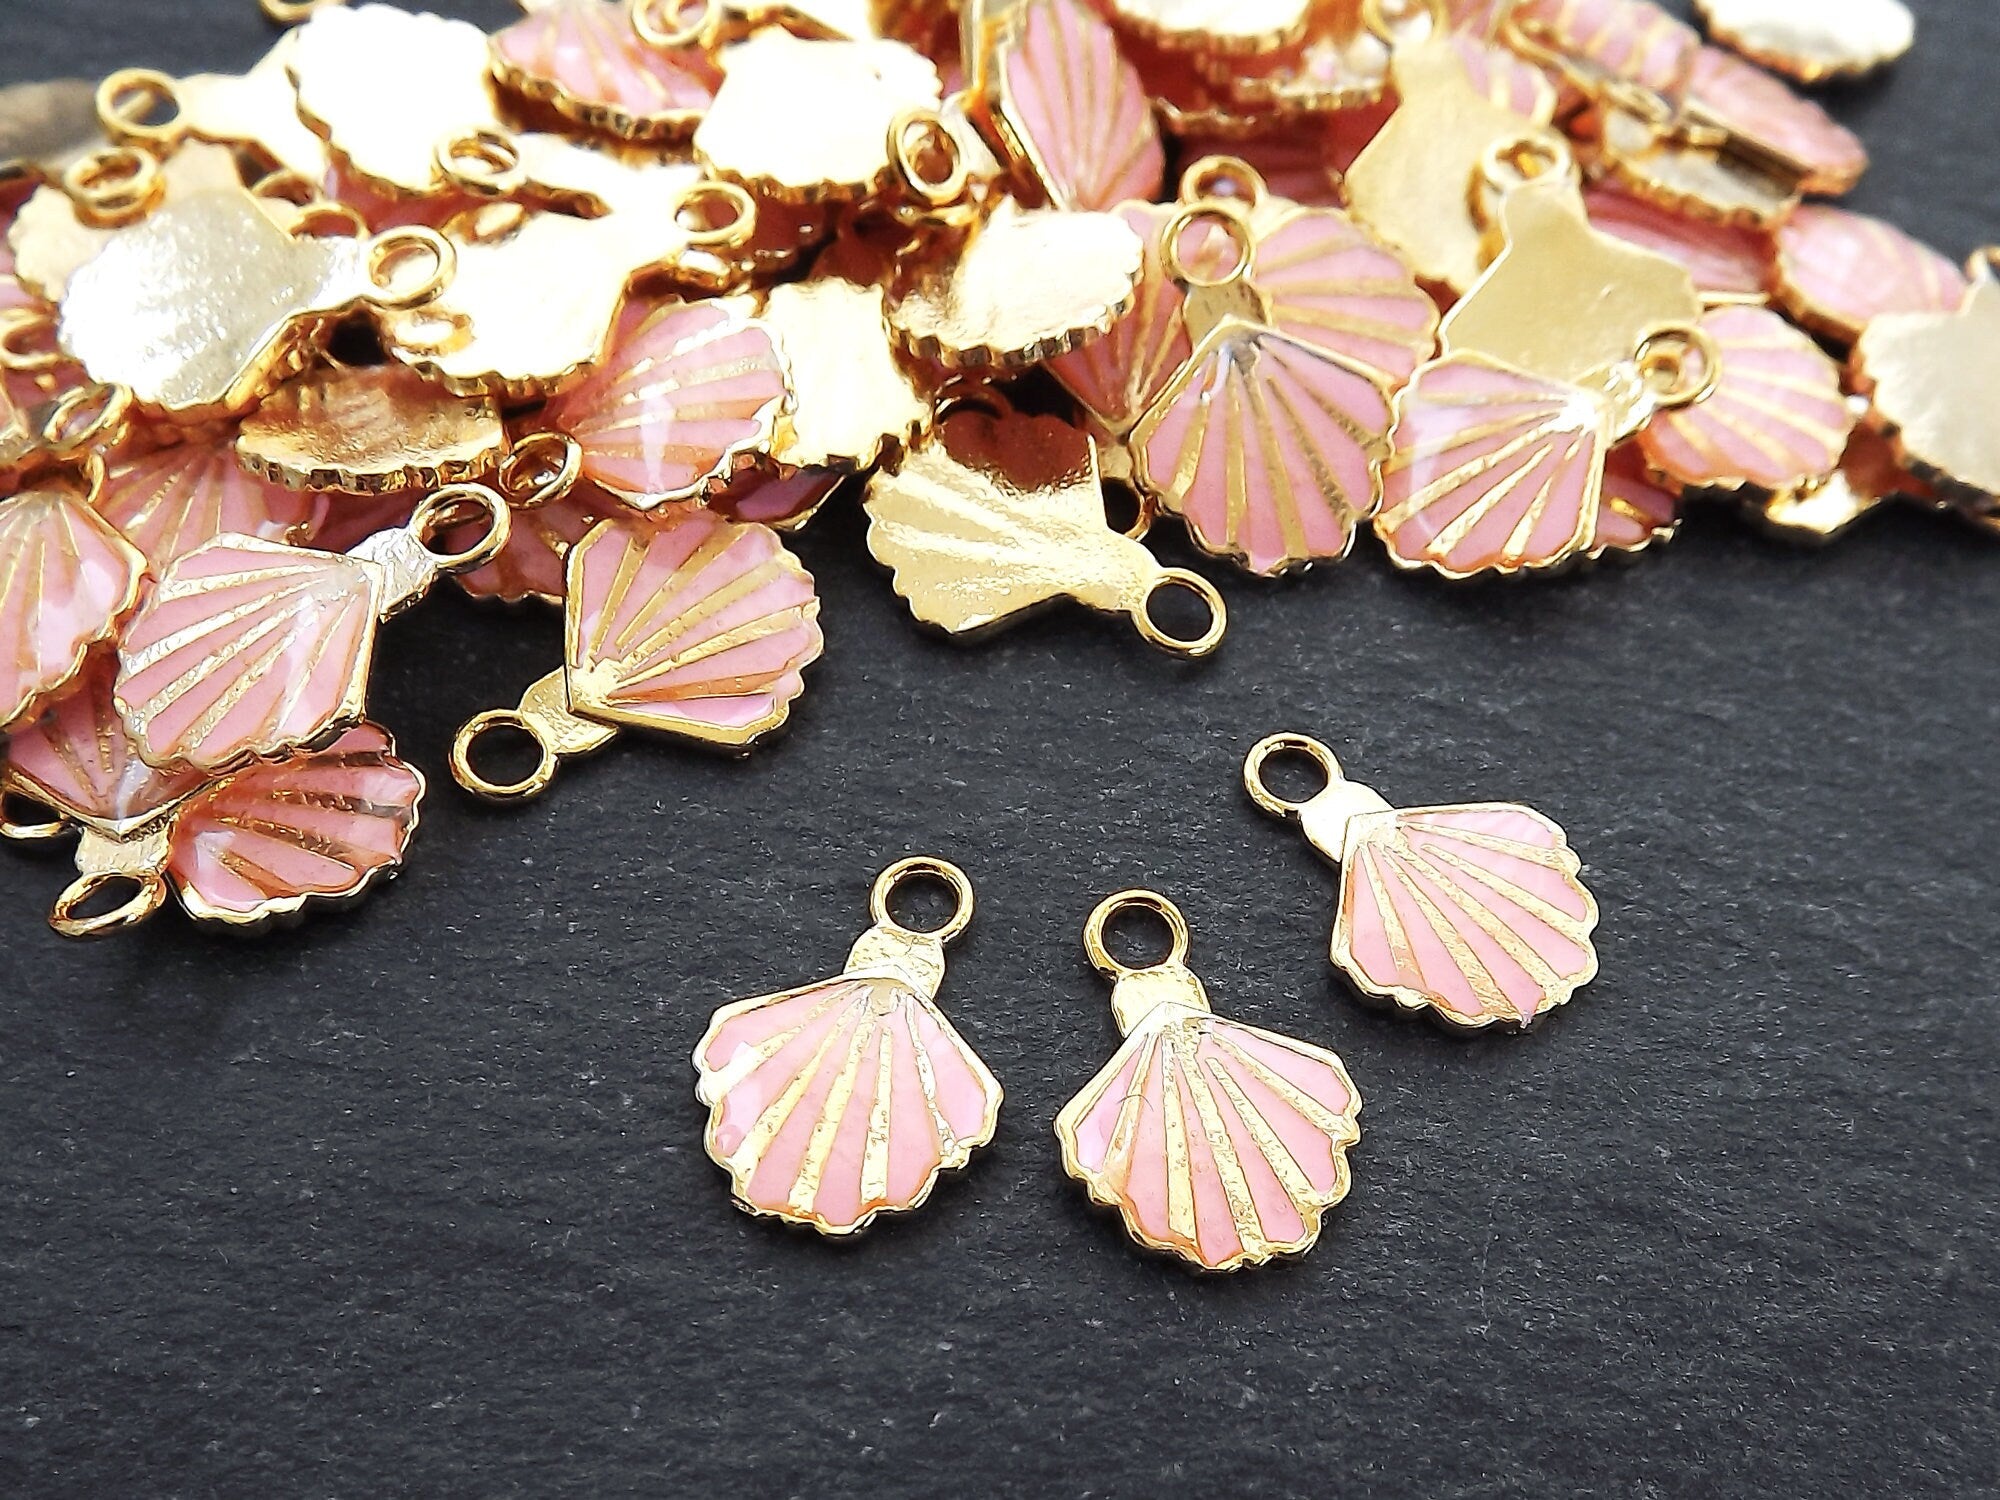 3 Shell Charms, Peach Enamel Small Shell Pendant Charms, Scallop Shell, Seashell Charms, Beach Charm, 22k Matte Gold Plated, 3pc